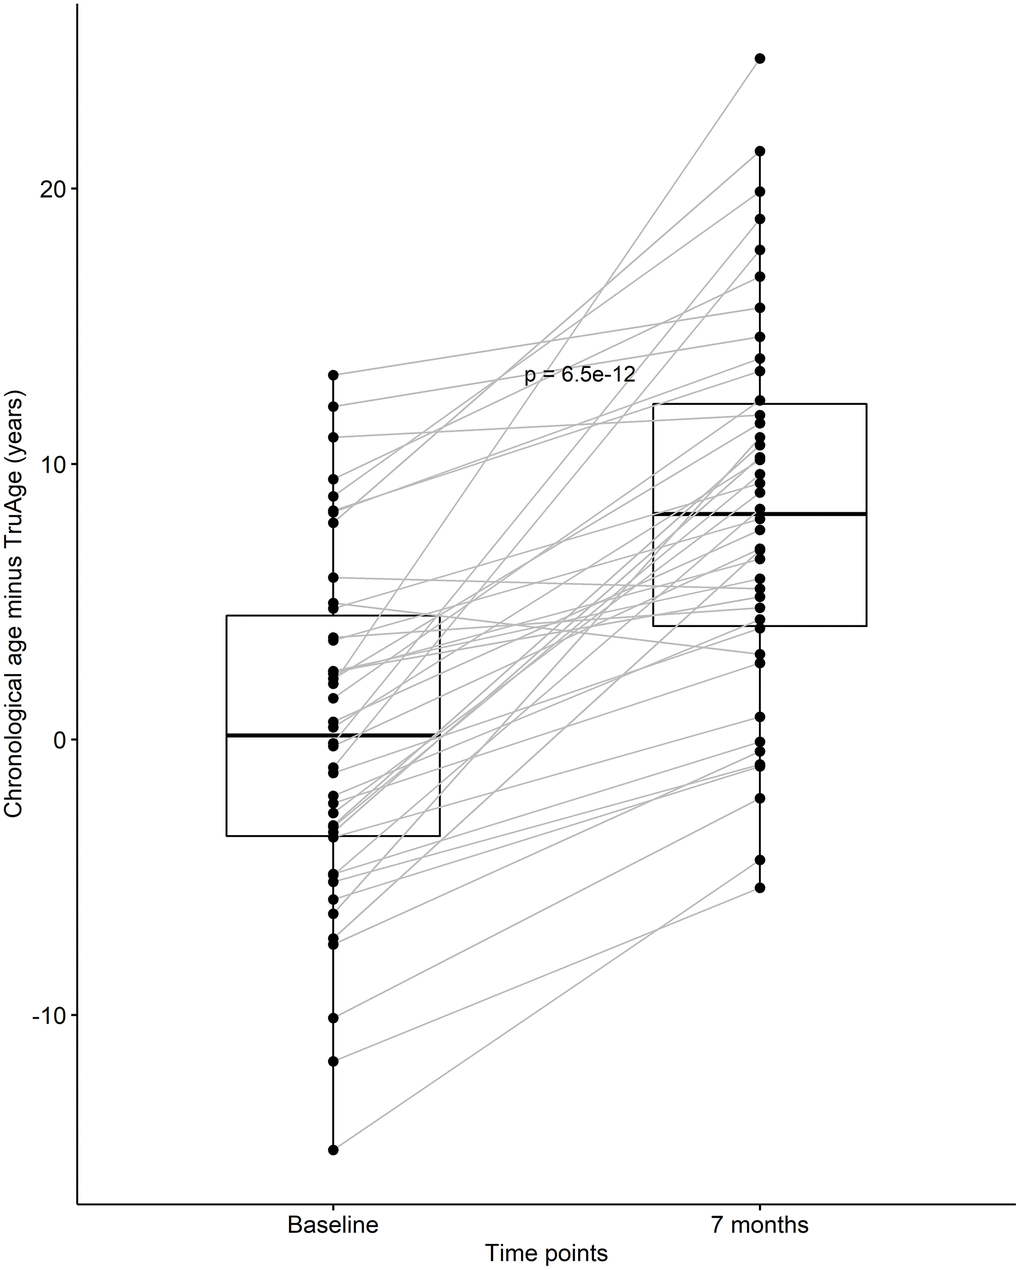 CaAKG decreased methylation age in the entire cohort. The paired box plots represent the treatment effects at the patient and group level (n=42), between baseline and end of the trial (which on average had a duration of 7 months). The box plots depict the median and the 25th and 75th quartiles.